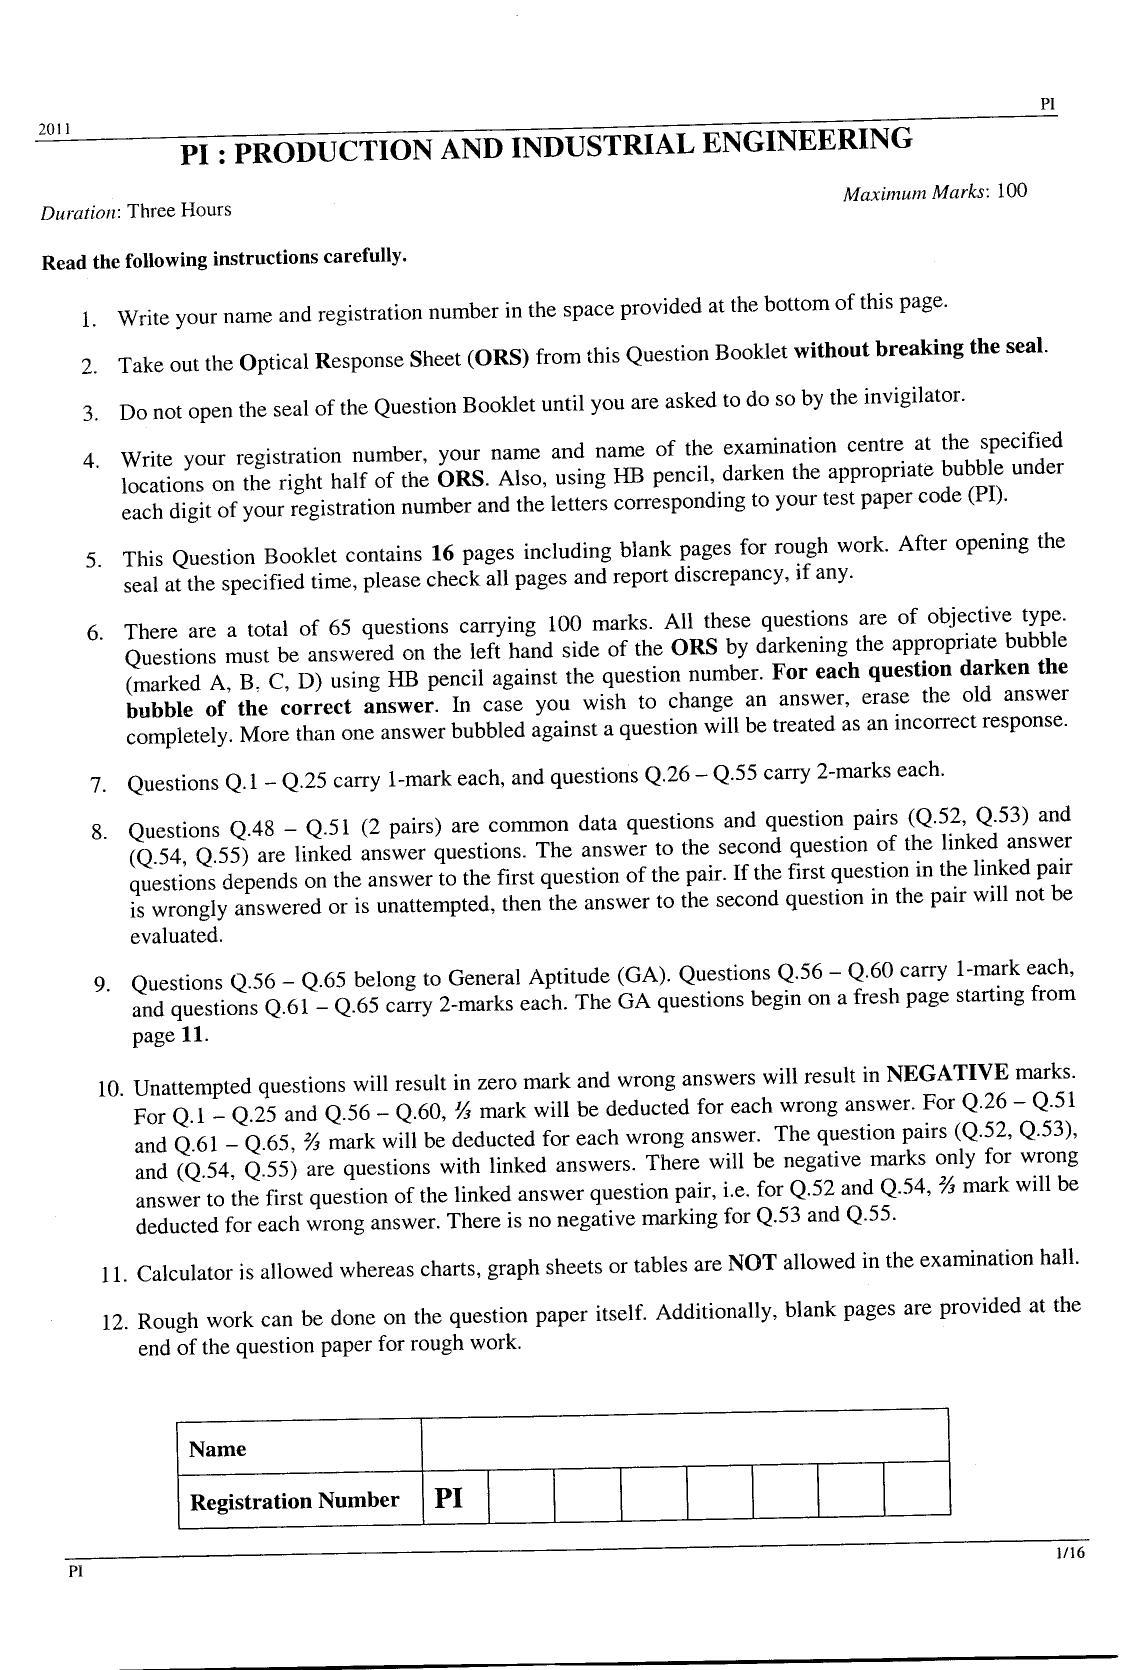 GATE 2011 Production and Industrial Engineering (PI) Question Paper with Answer Key - Page 1